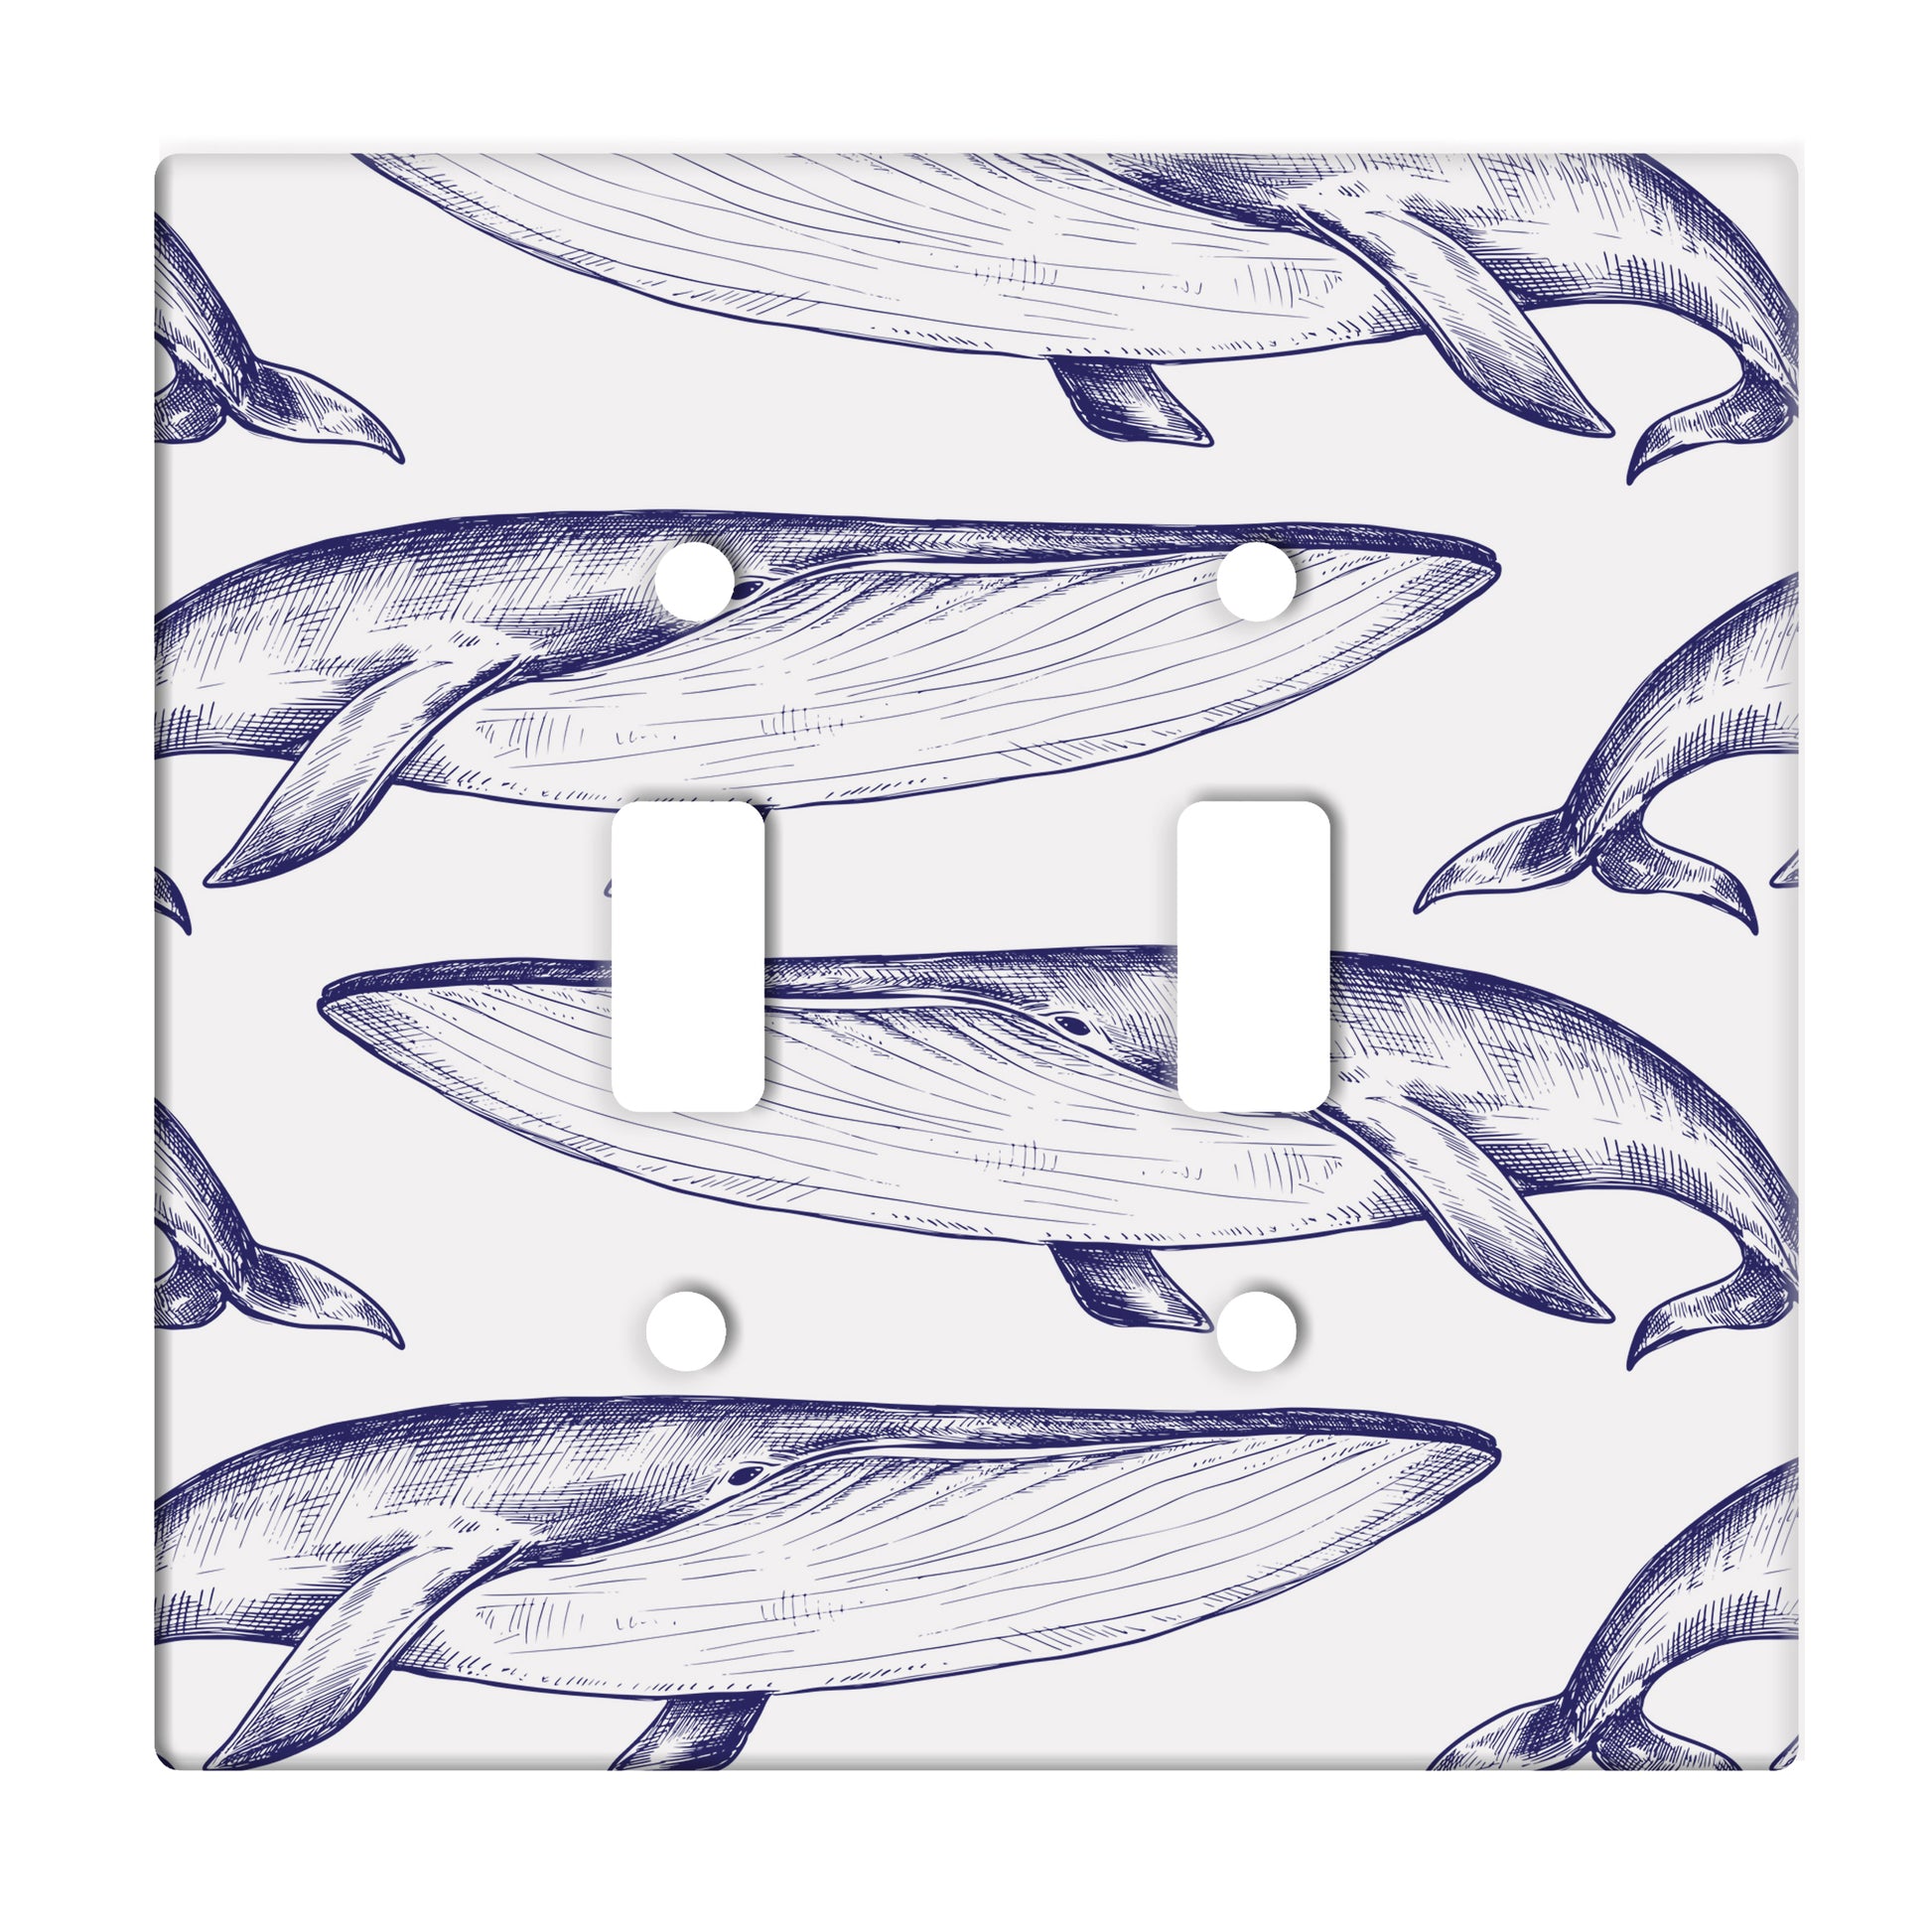 white ceramic double toggle switch plate featuring alternating pattern of navy whales.